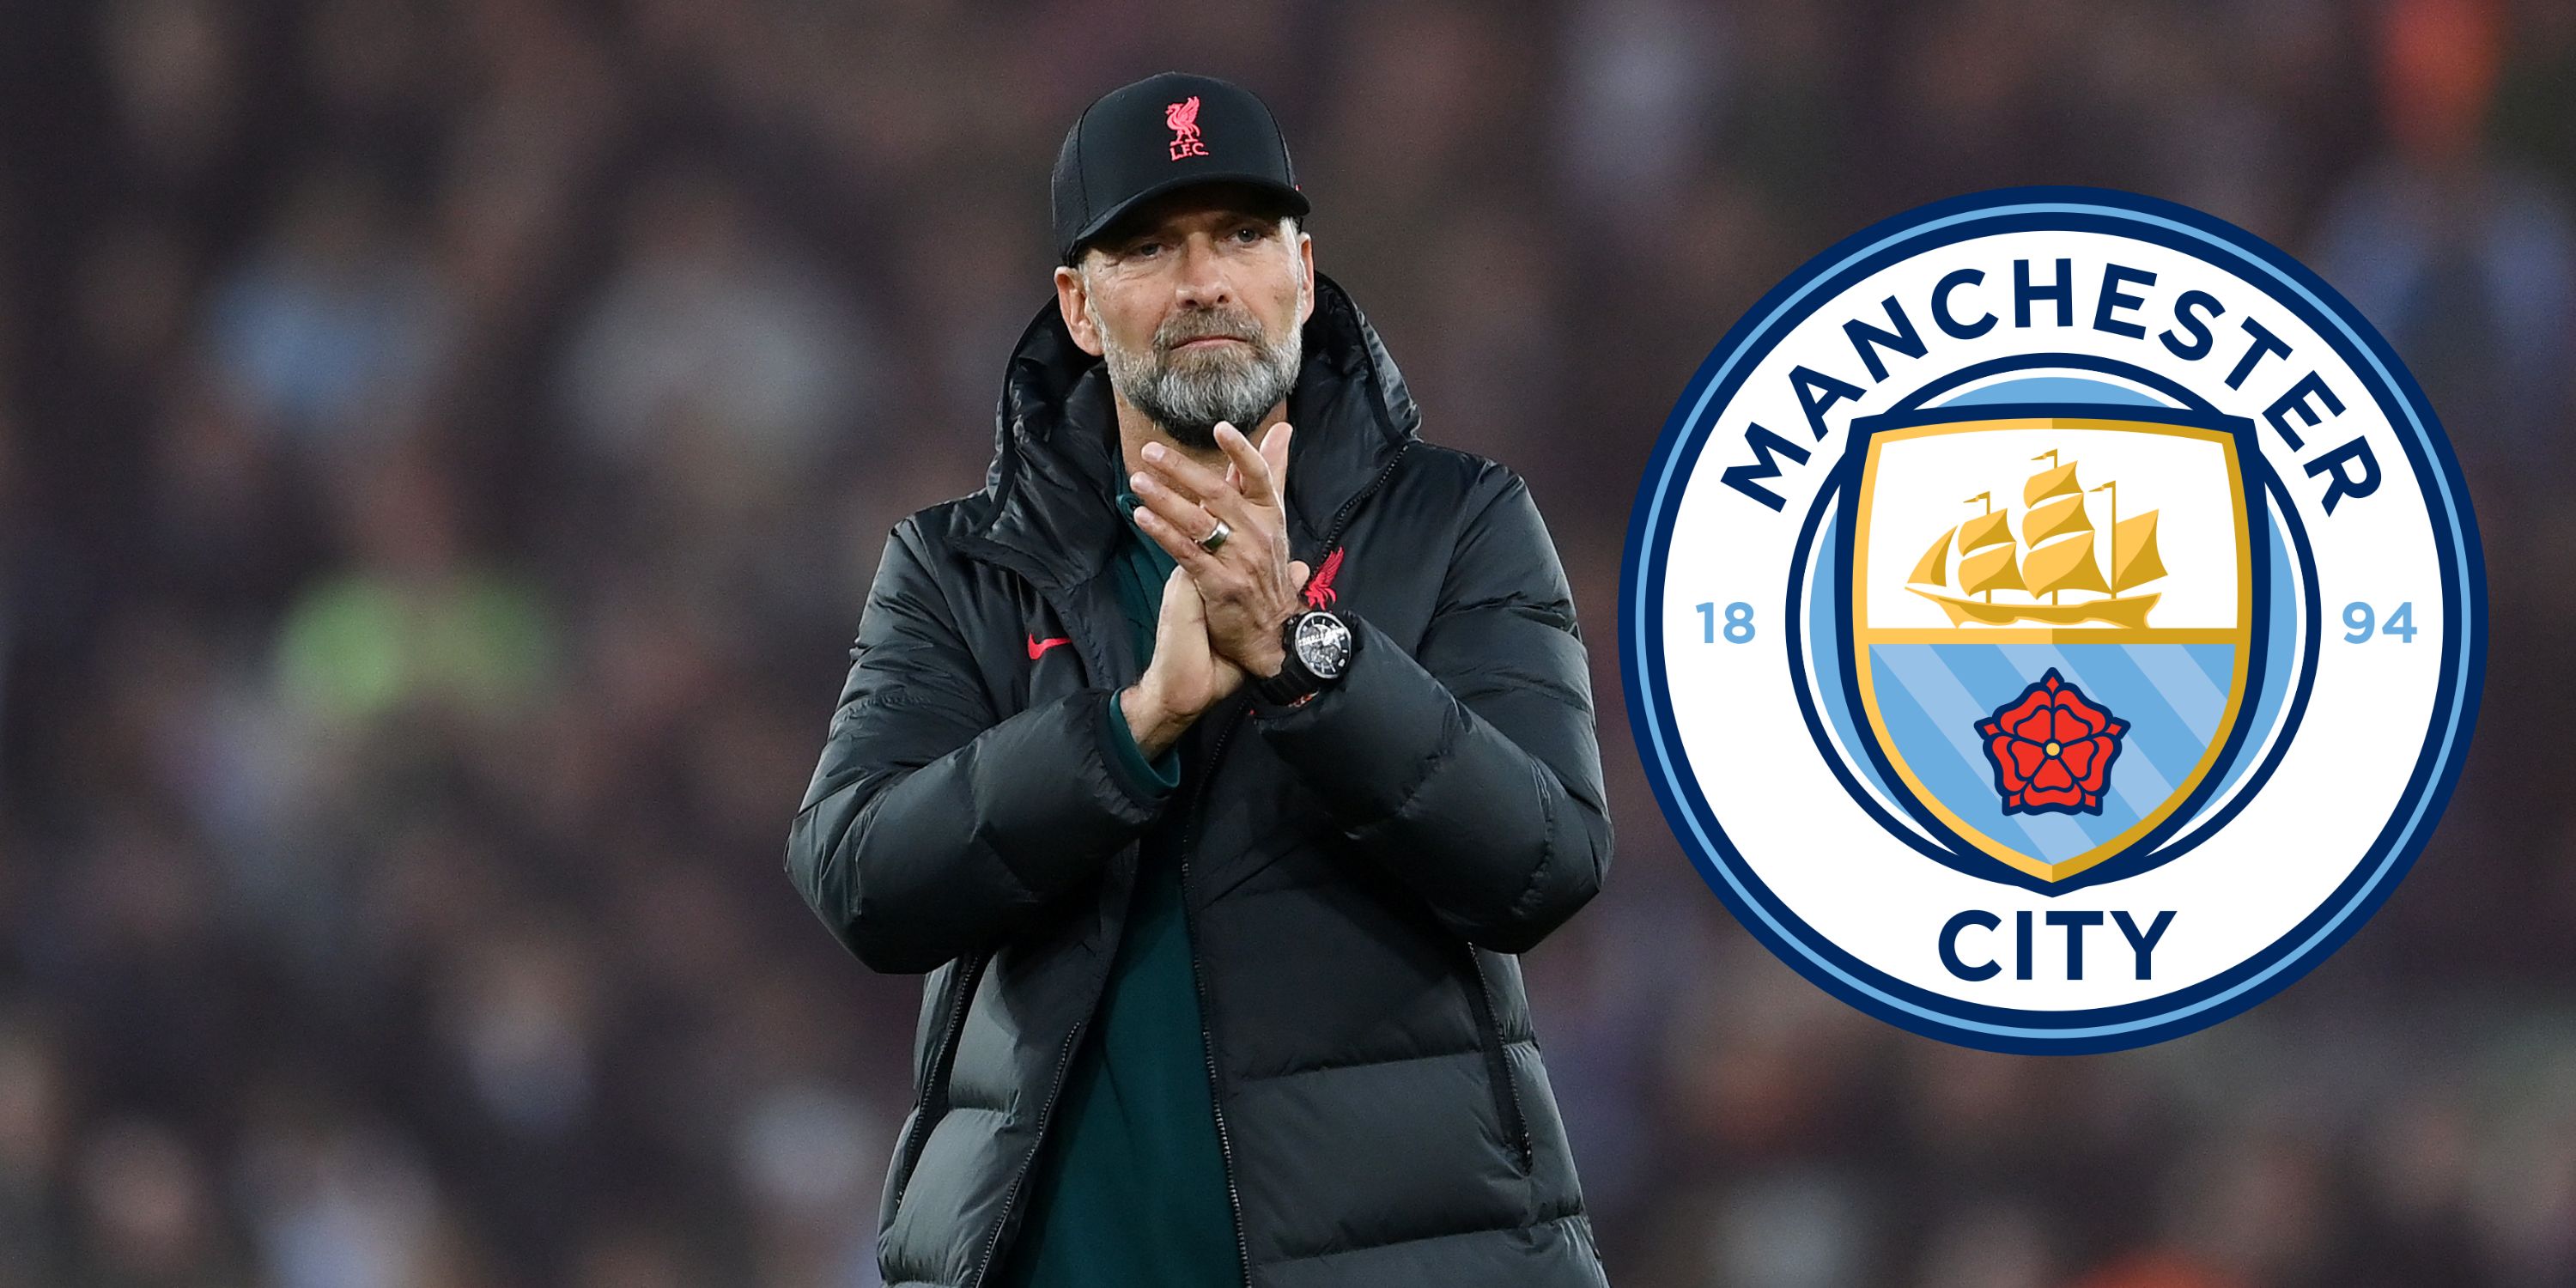 Jurgen Klopp takes legal action over Man City’s xenophobic claim after comments were ‘misunderstood’